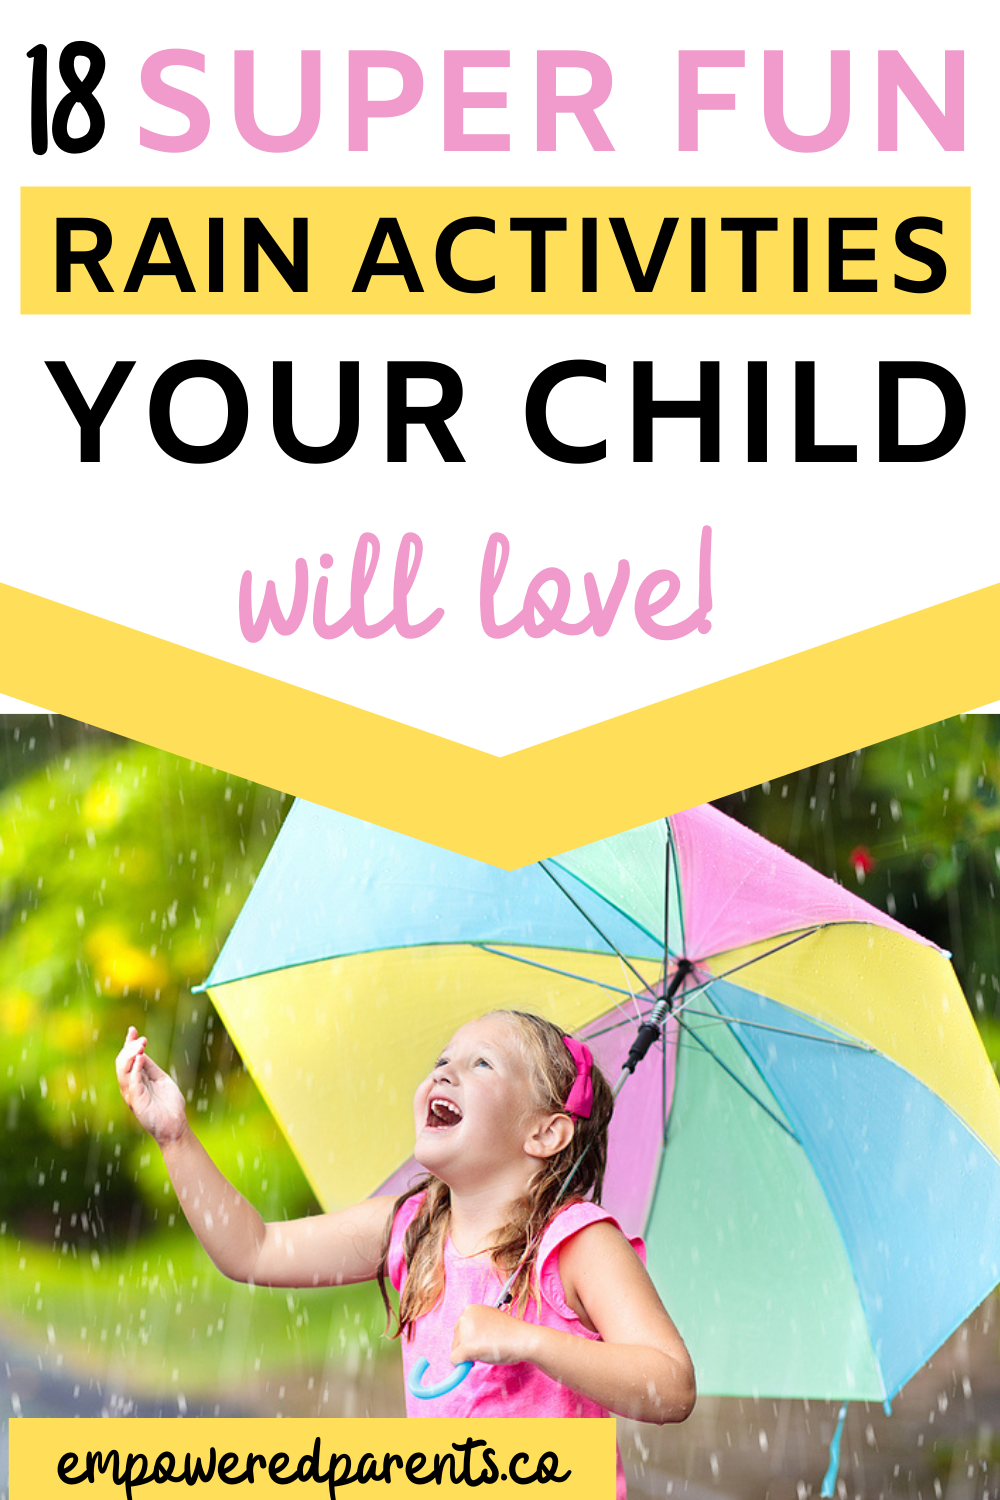 Child playing in the rain. Text overlay reads "18 super fun rain activities your child will love".